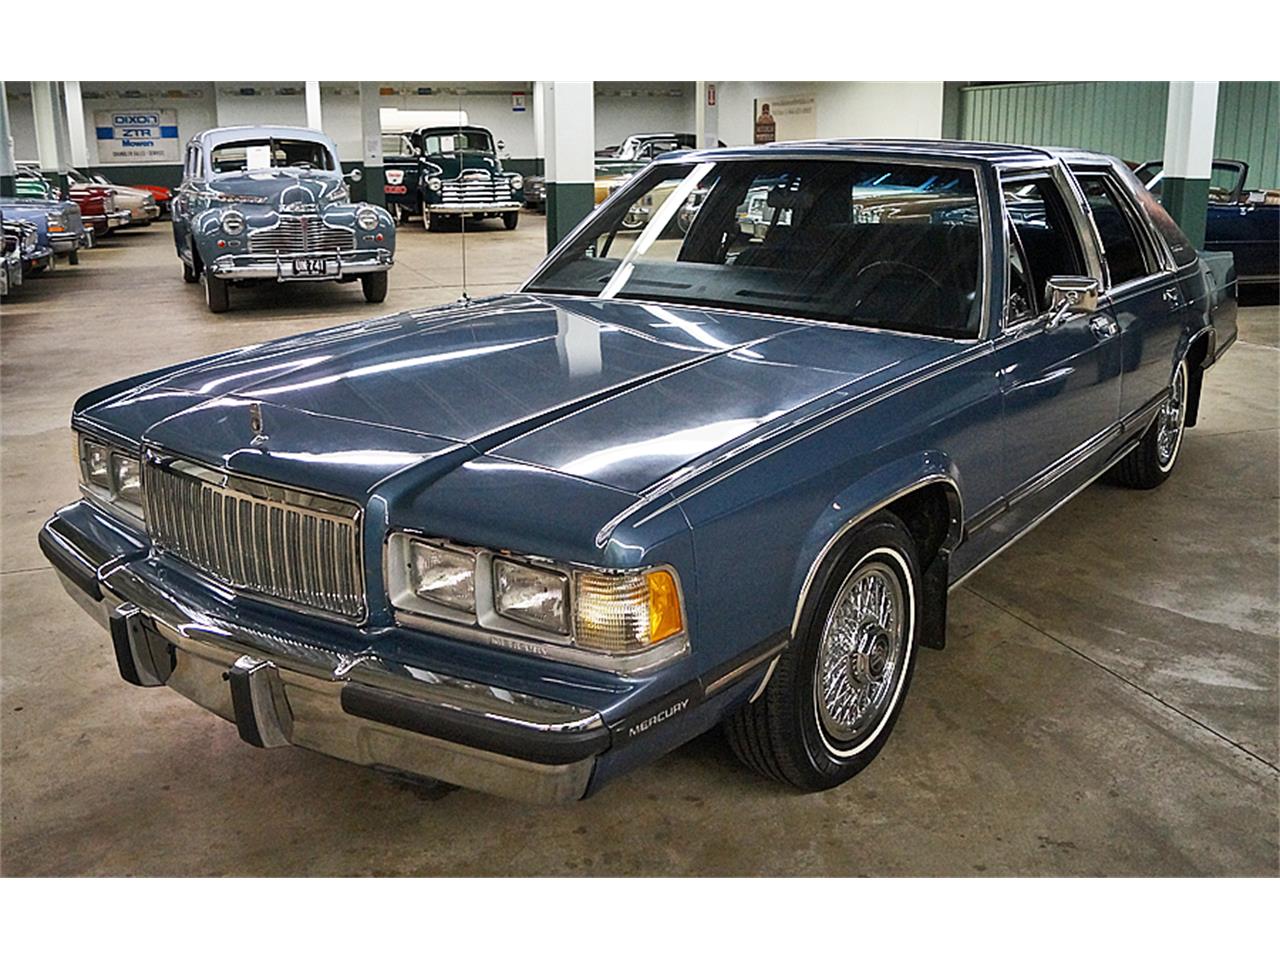 Used Mercury Grand Marquis For Sale Near Me With Photos